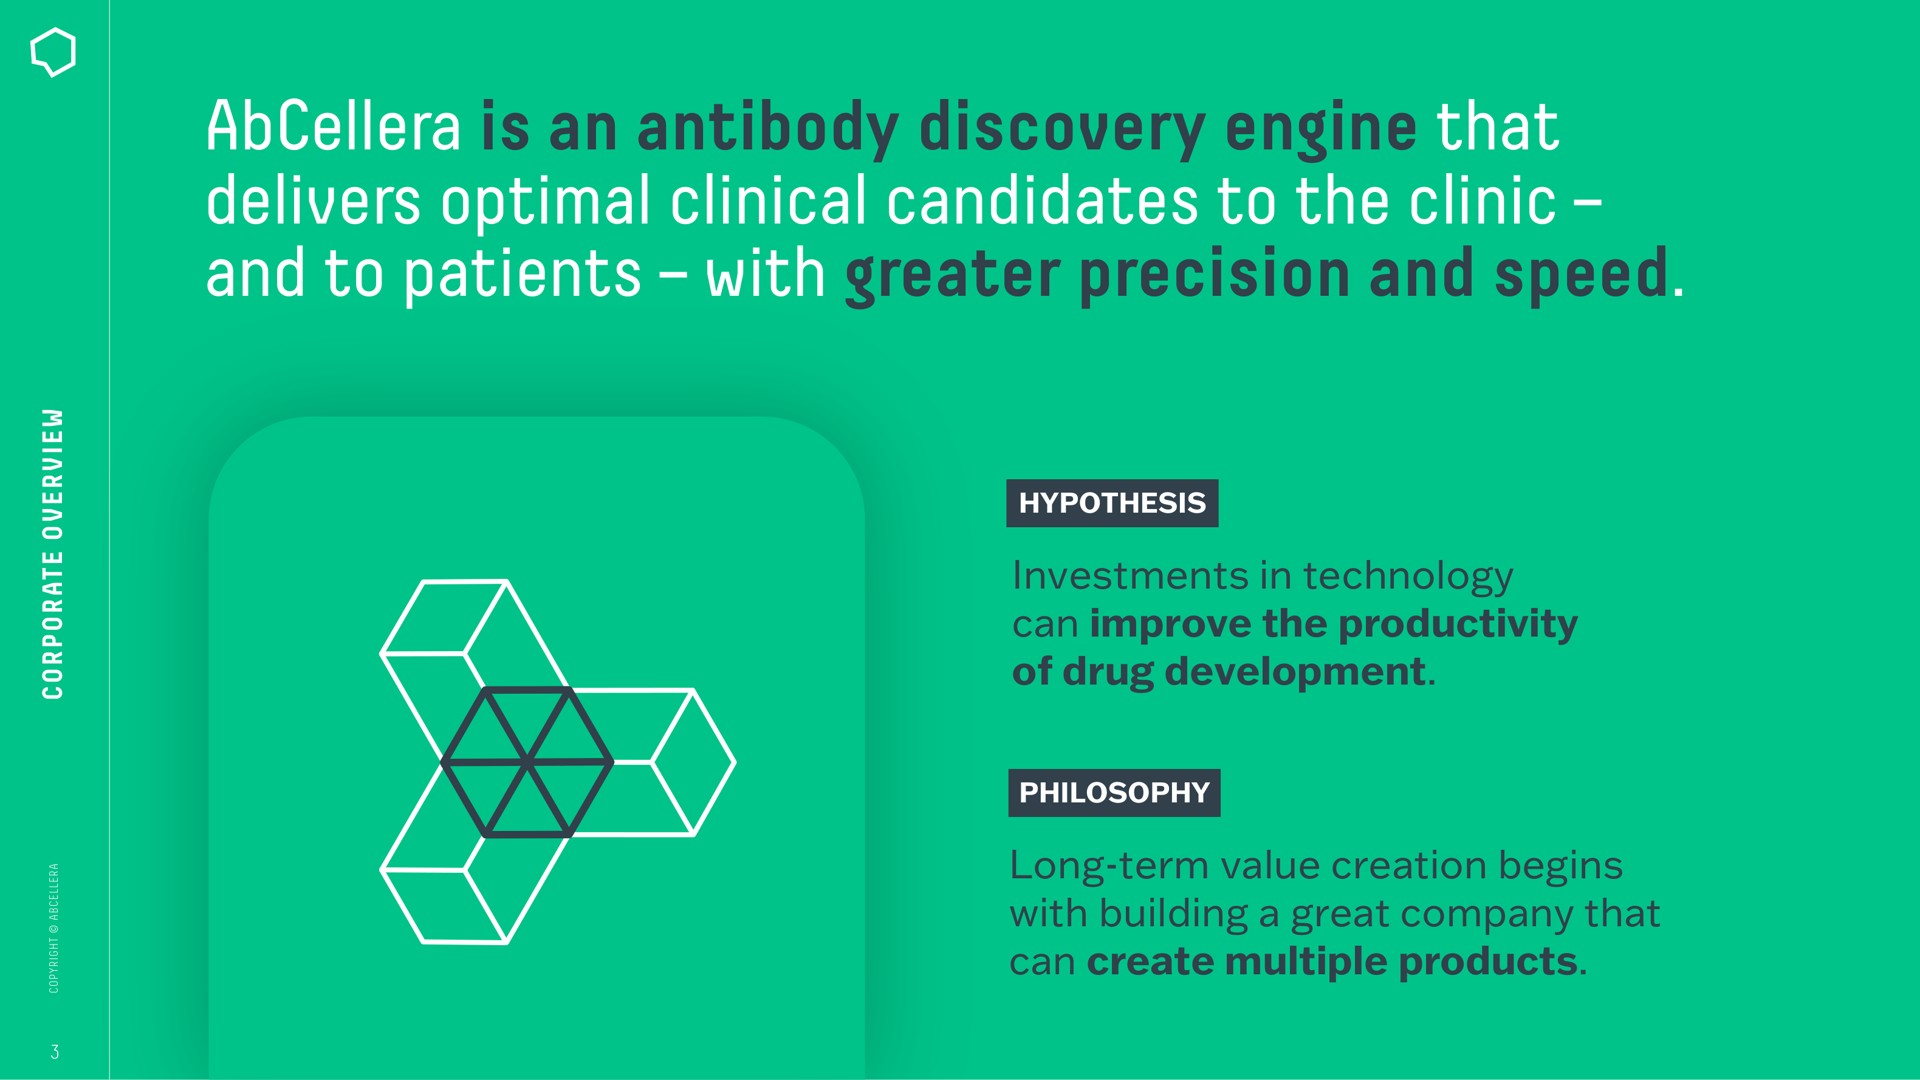 is an antibody discovery engine that delivers optimal clinical candidates to the clinic and to patients with greater precision and speed tore | AbCellera